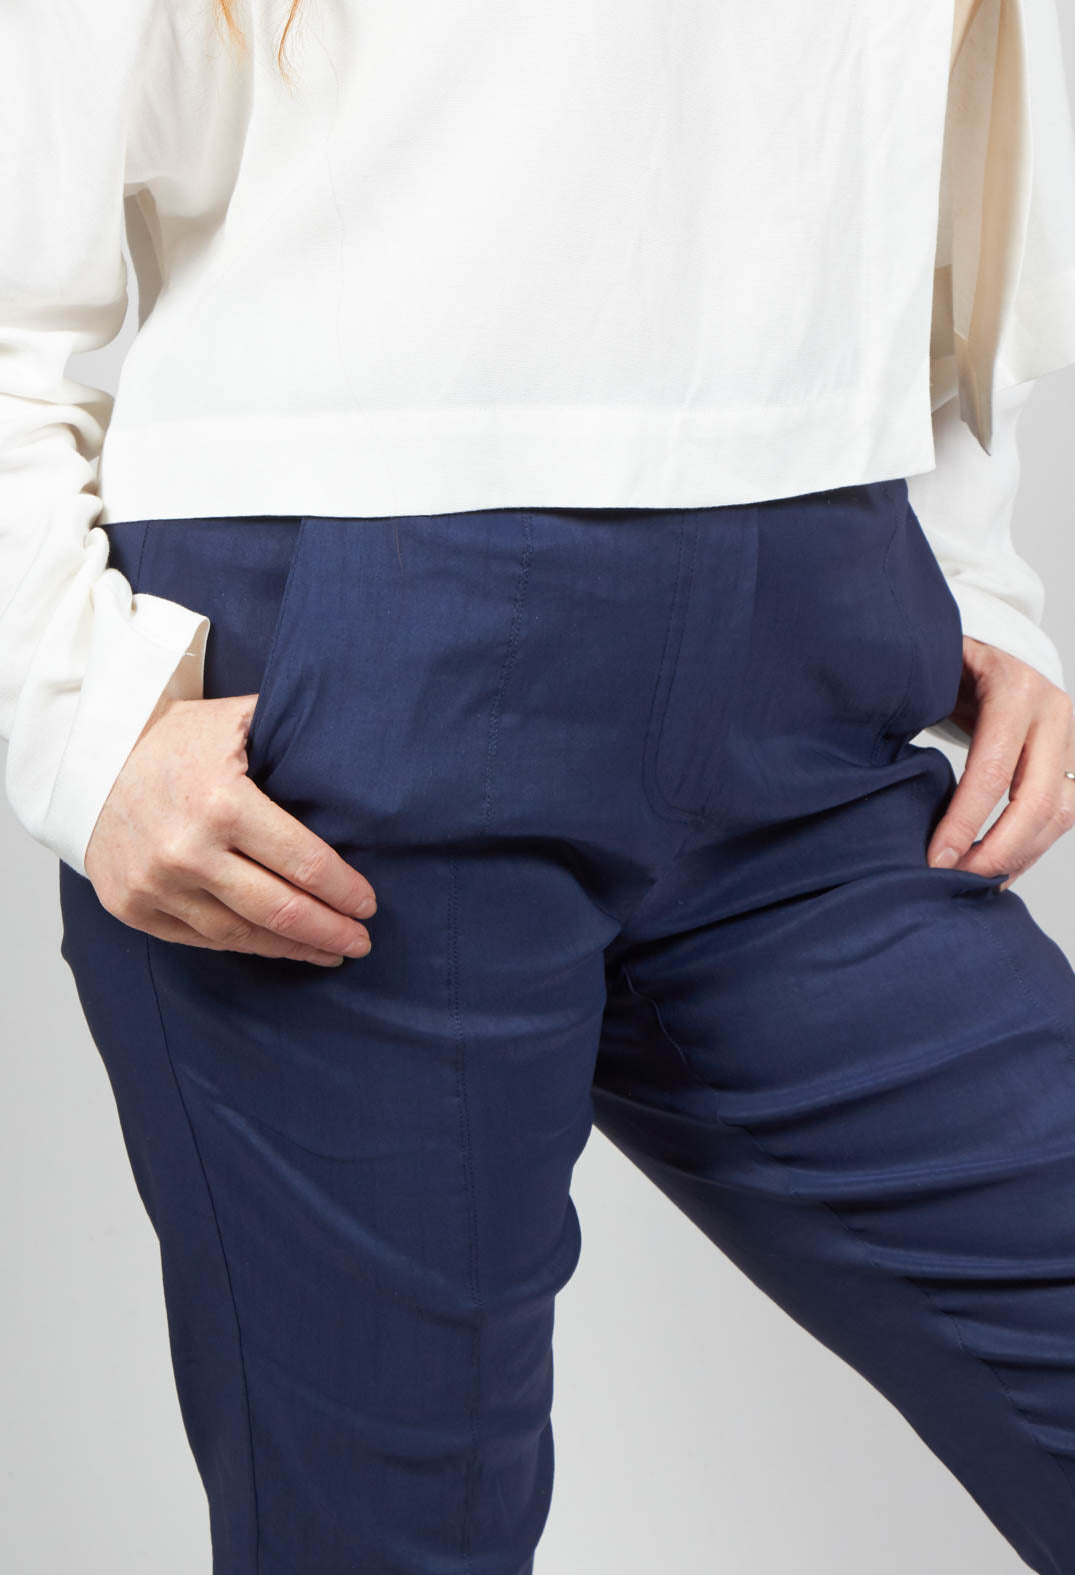 Pull on Trousers with Side Pockets in Navy